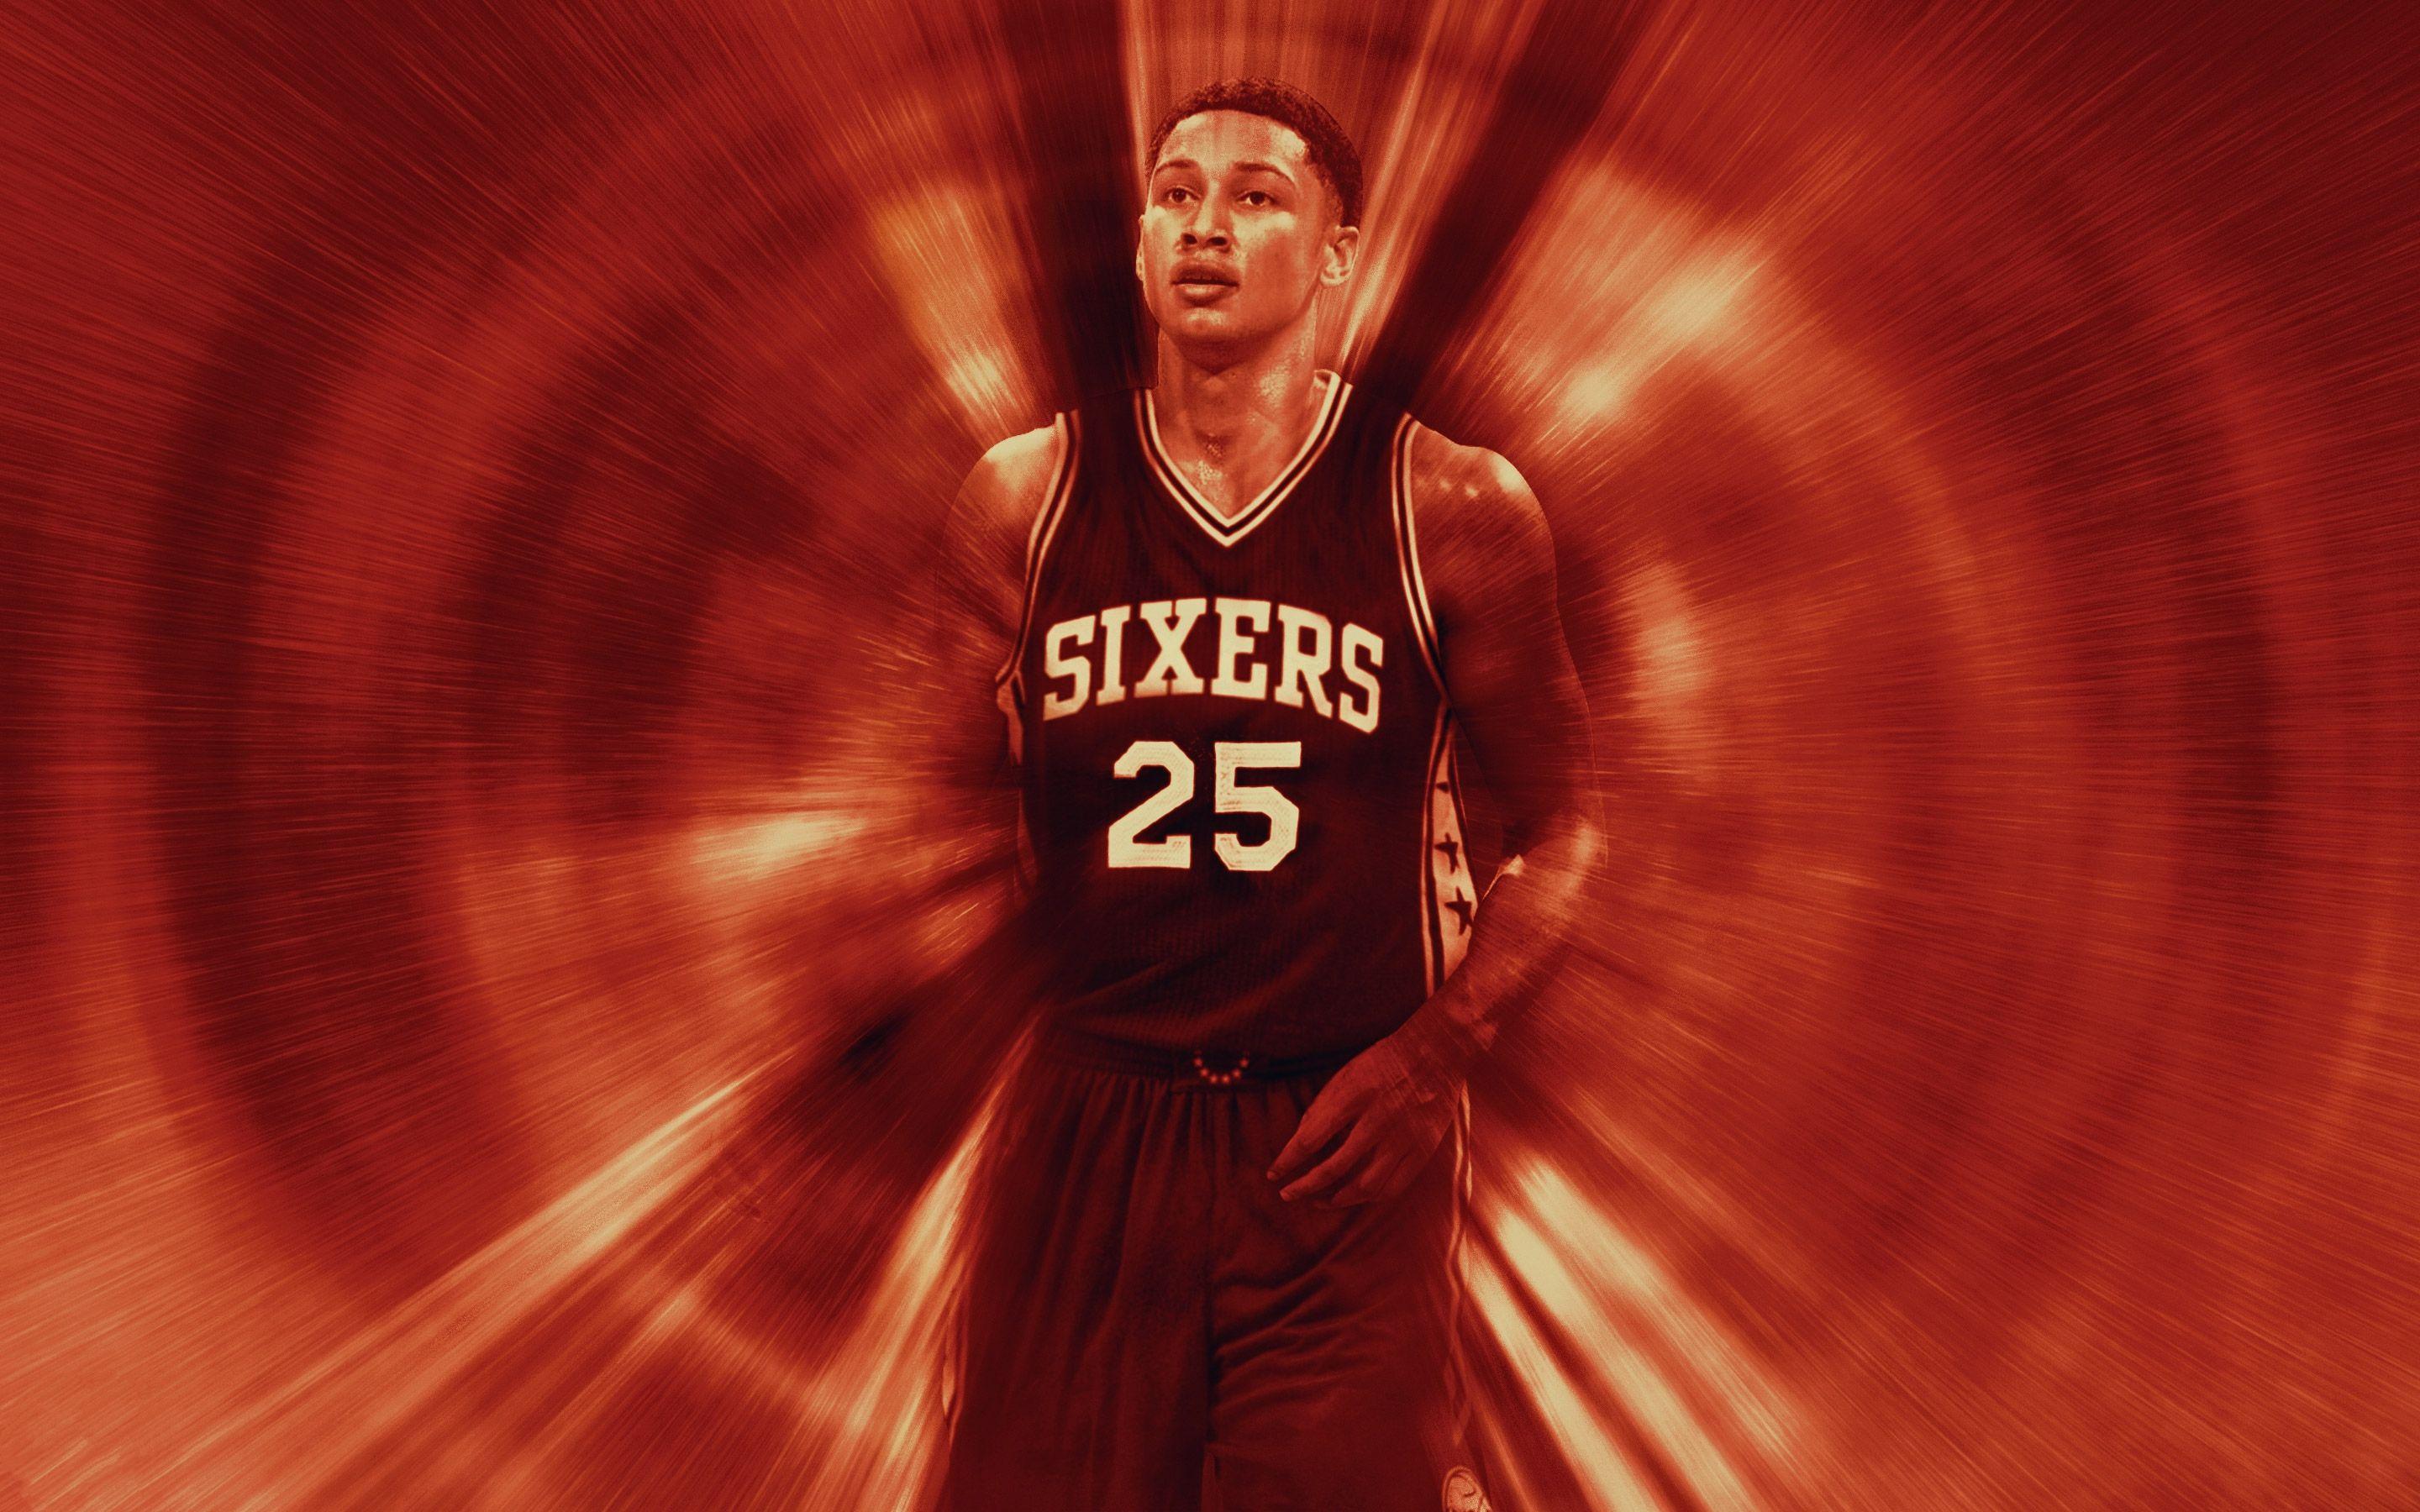 Heres a Ben Simmons wallpaper I made today Let me know what you think   rsixers